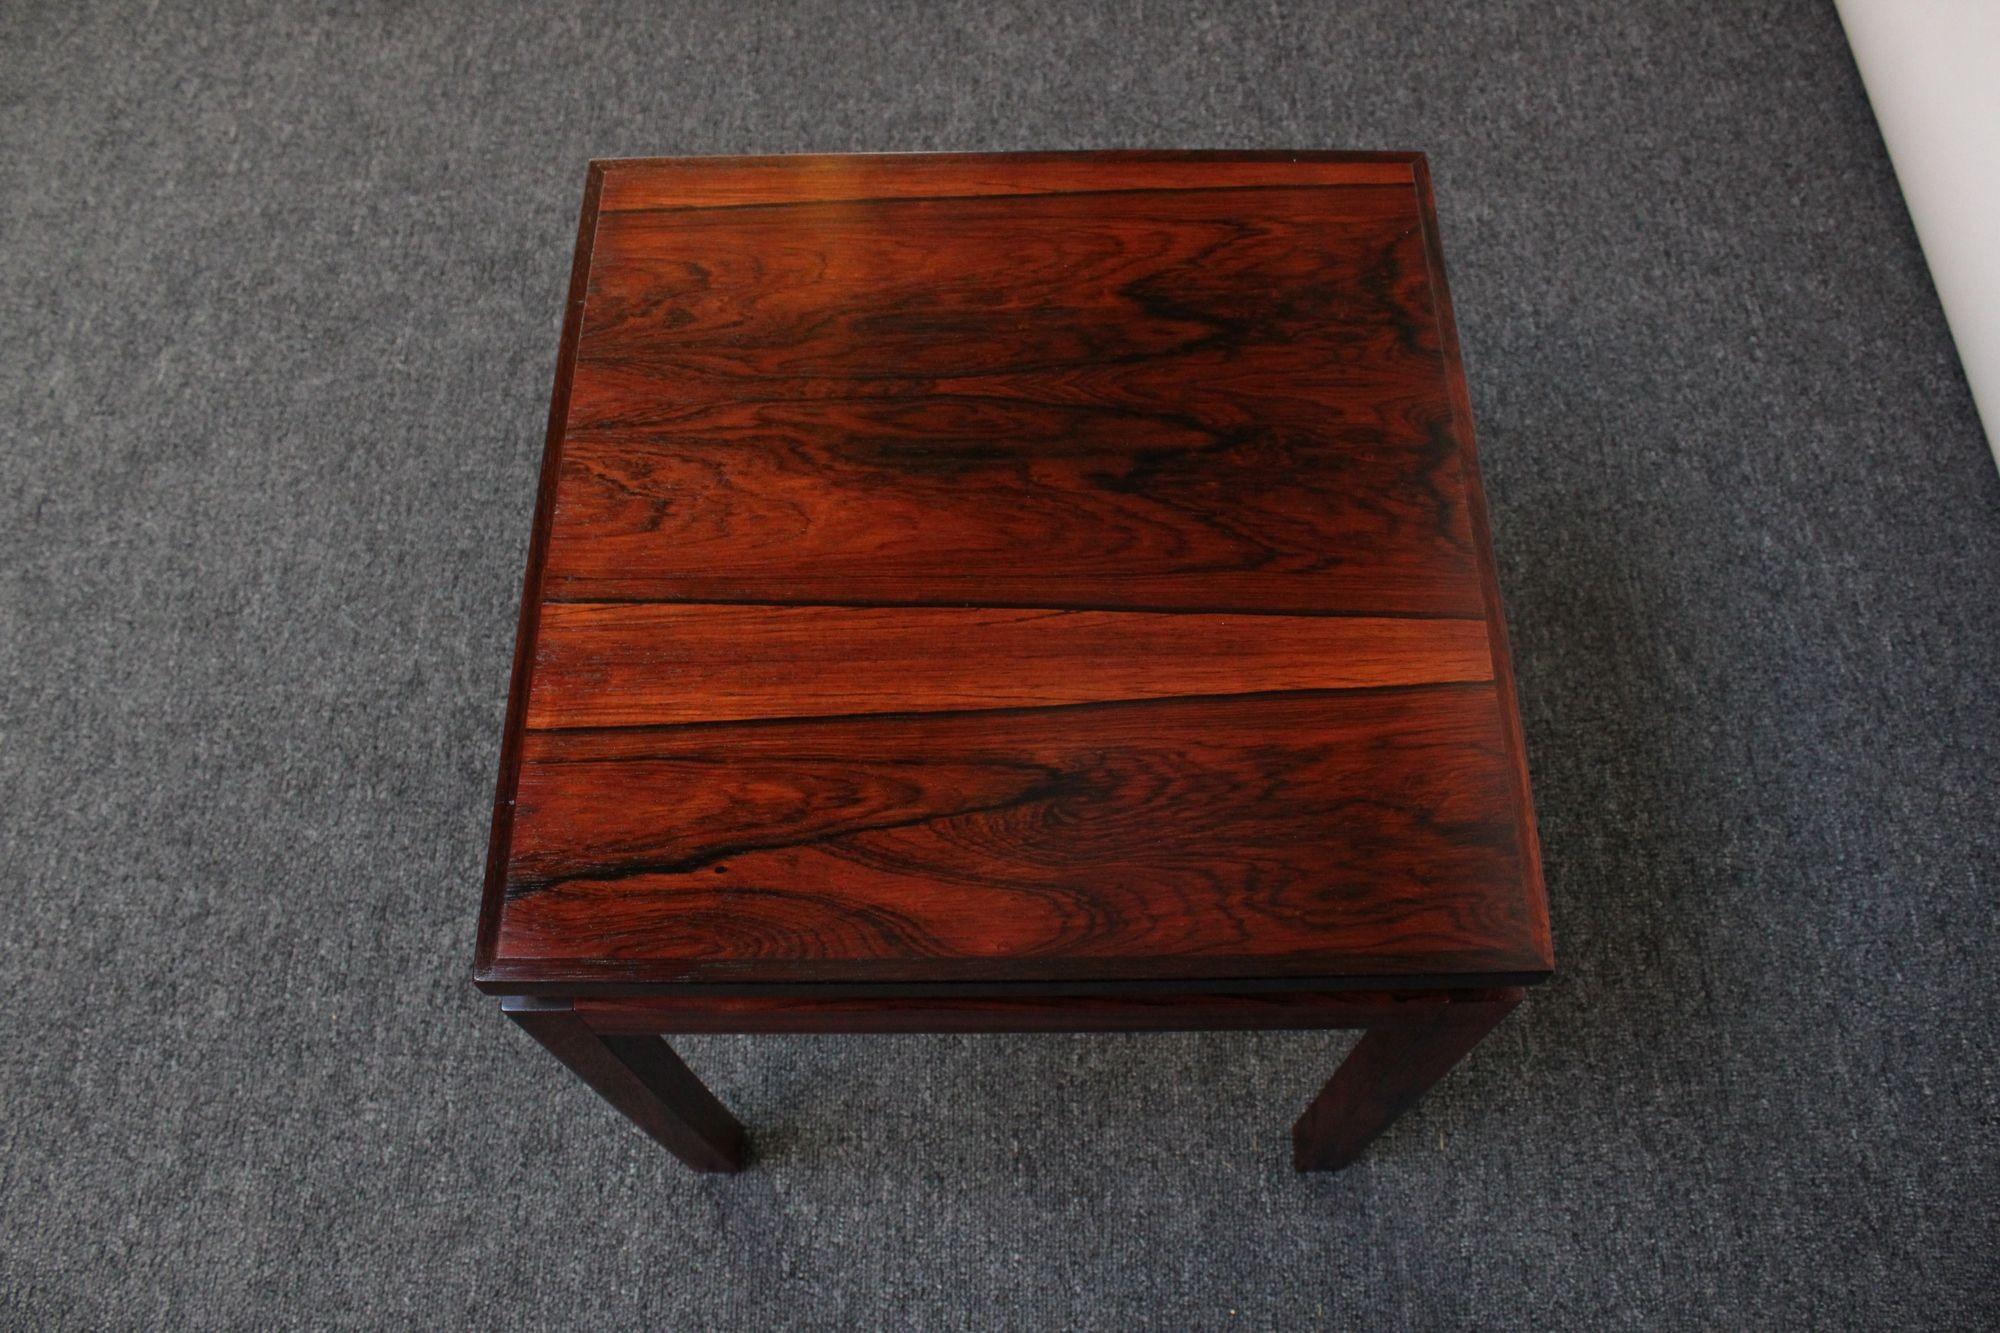 Danish Modern Rosewood Side Table by Poul Hundevad for Fabian 1